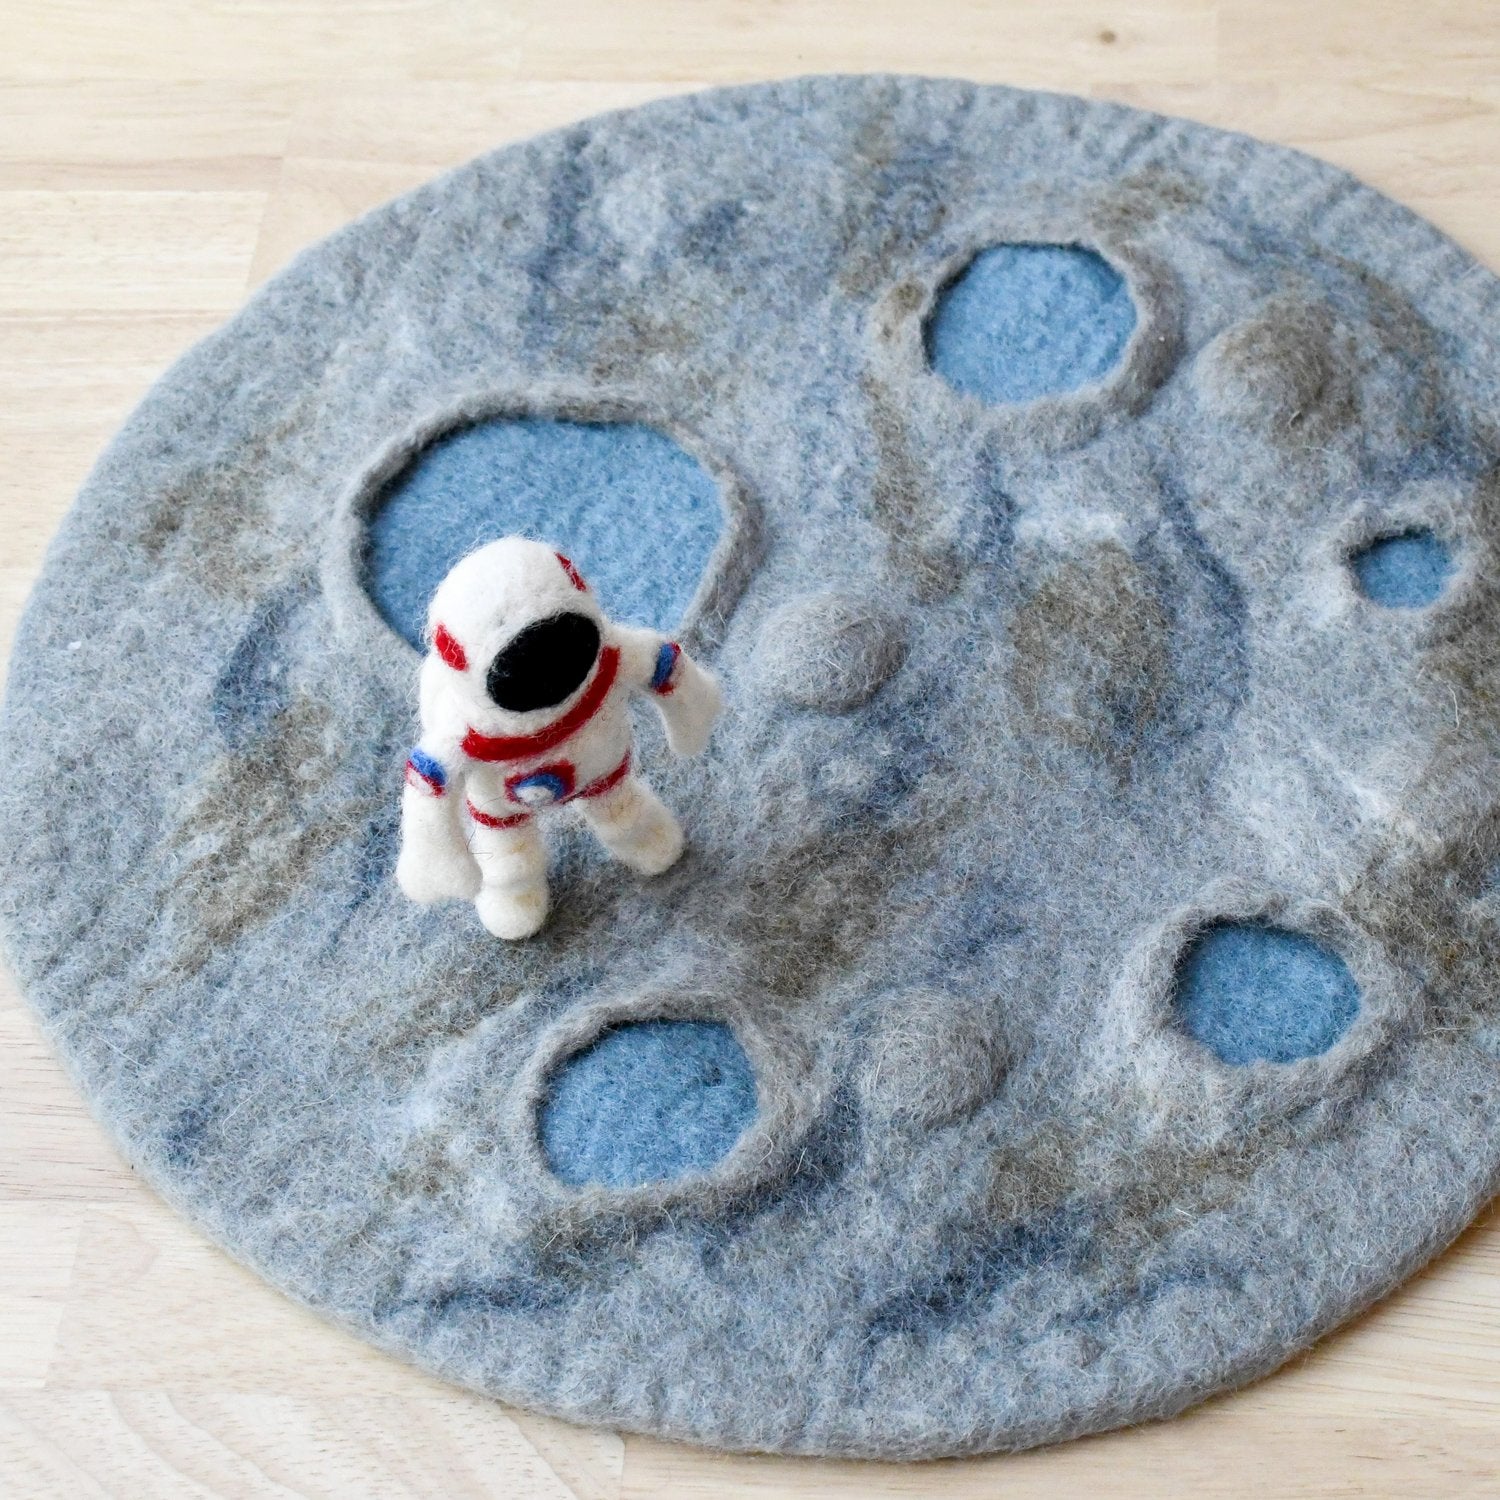 Moon crater with astronaut moon playscape-Fun-Little Fish Co.